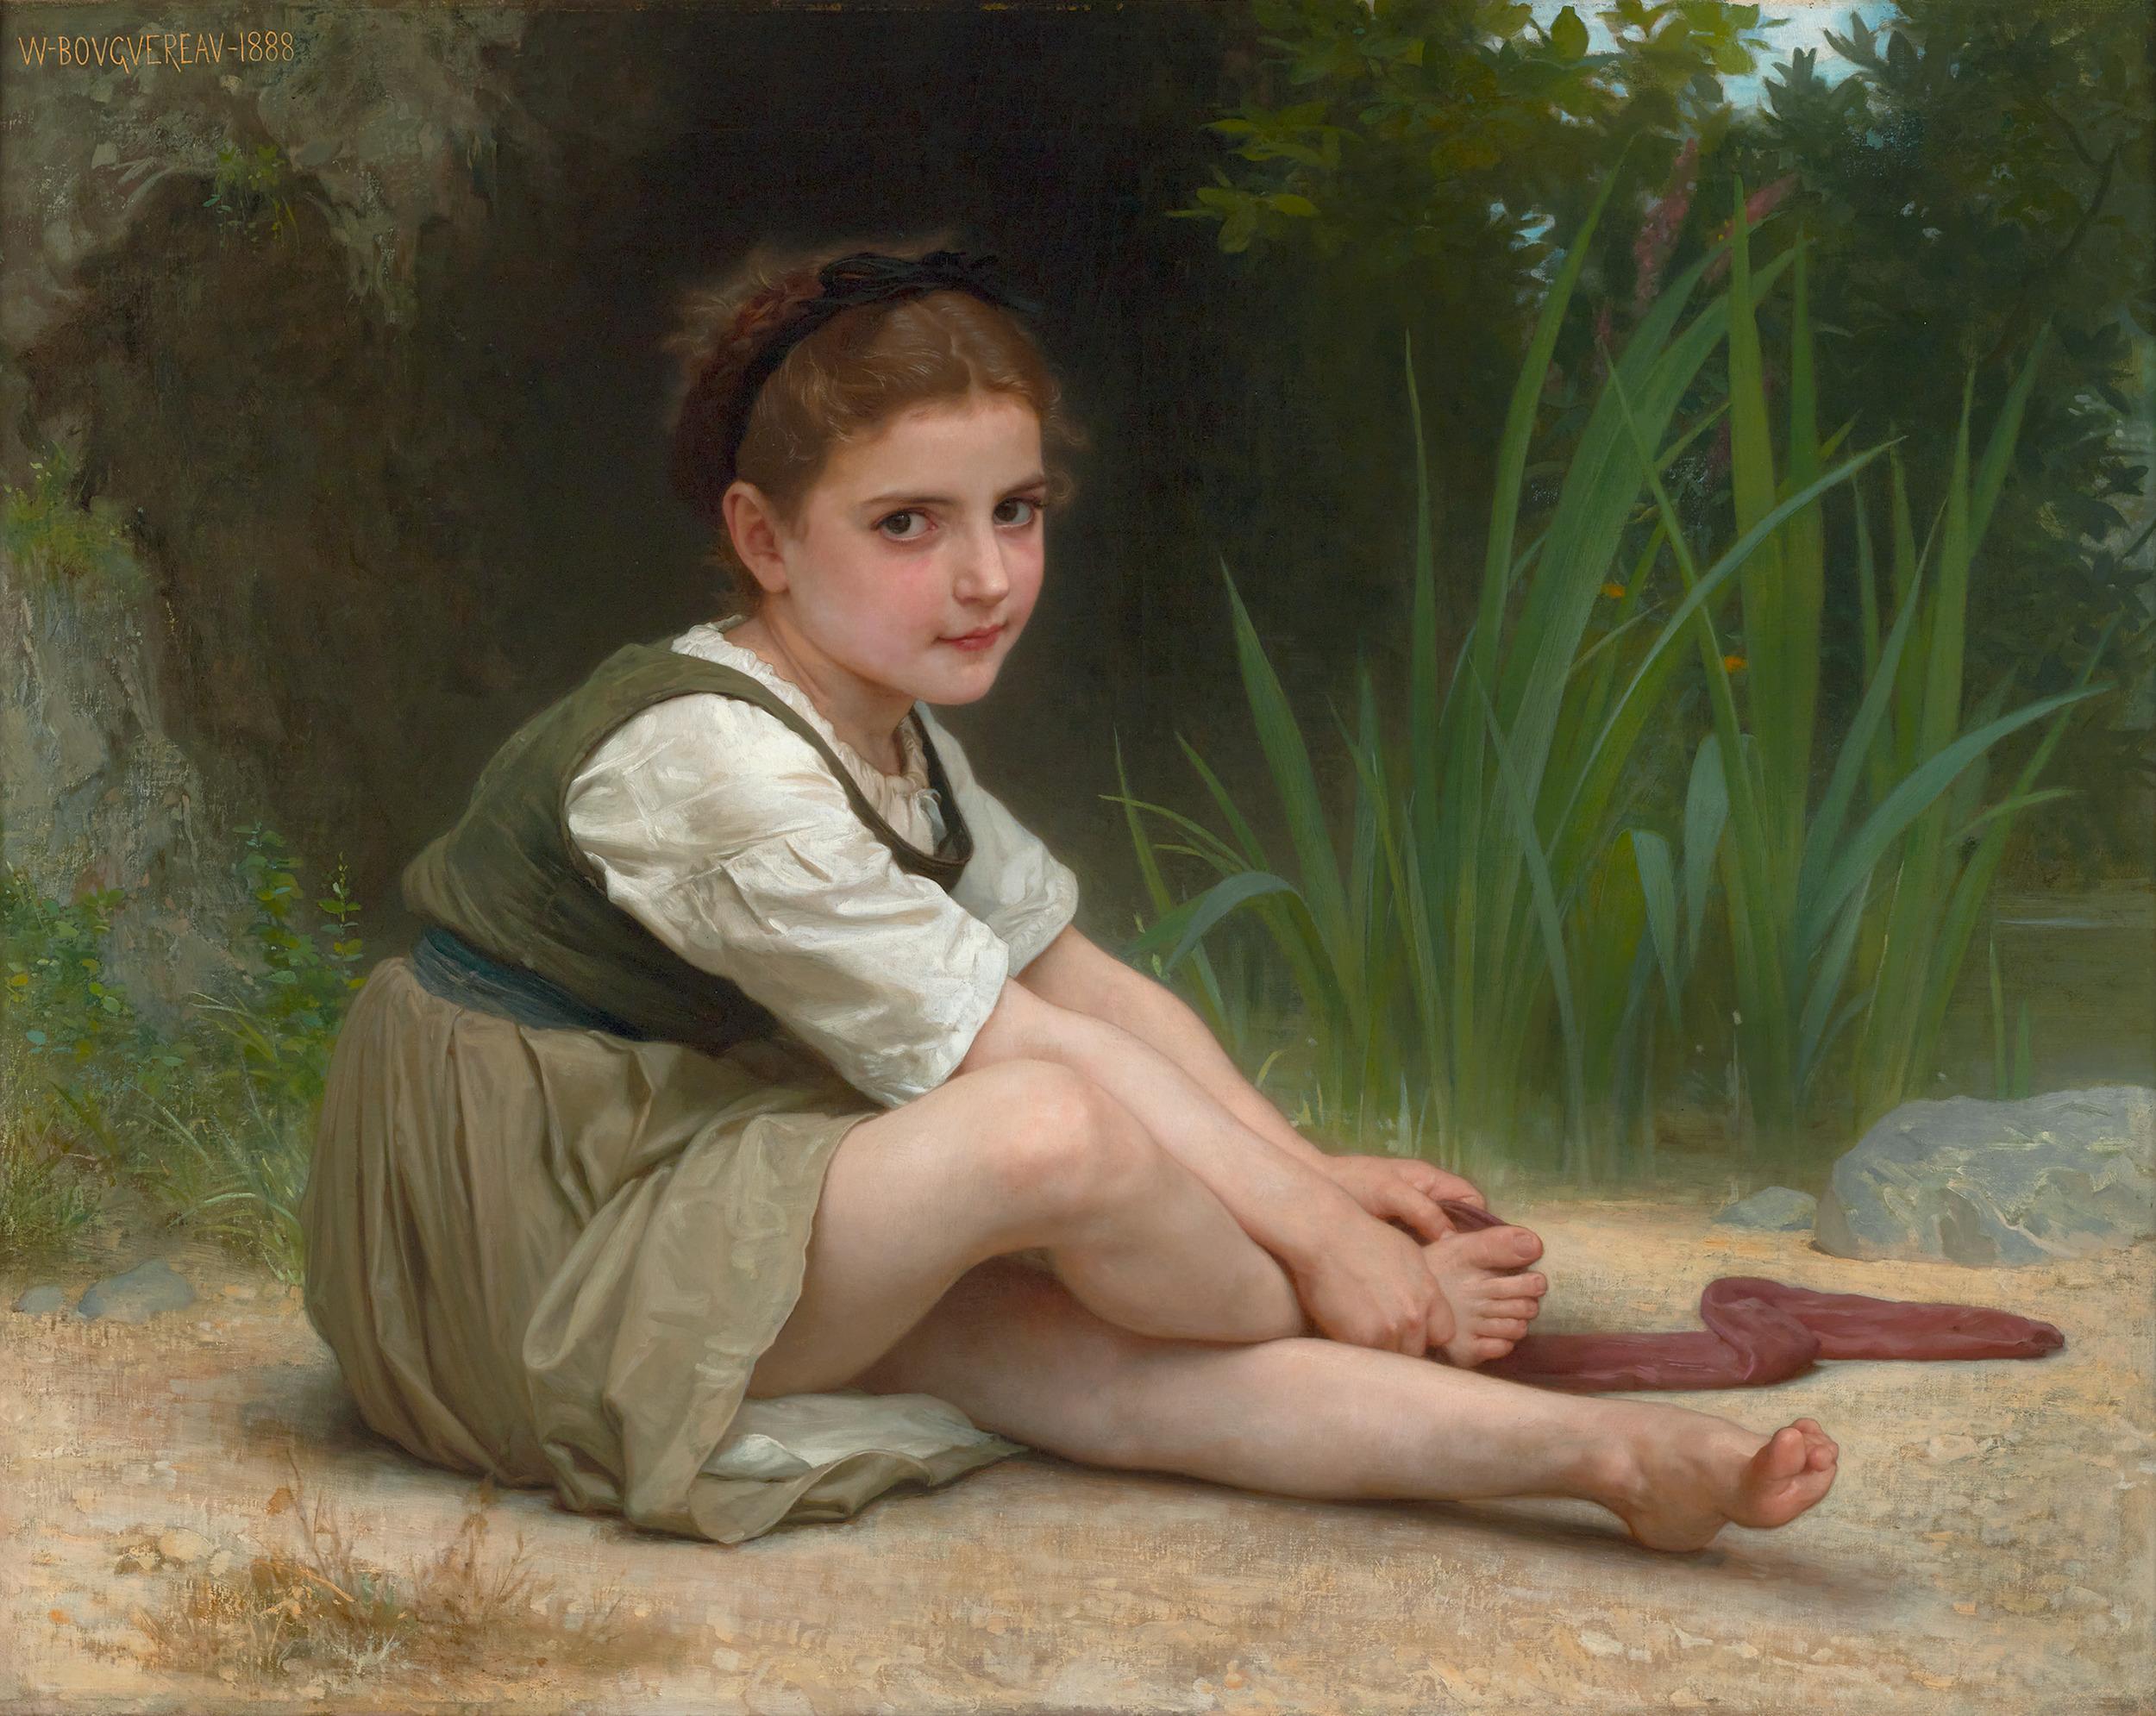 William-Adolphe Bouguereau
1825-1905  French

Au Bord du Ruisseau

Signed and dated “W-Bouguereau-1888” (upper left)
Oil on Canvas

“Bouguereau’s paintings of children allowed for the expression of values that formed, for the painter, the very heart